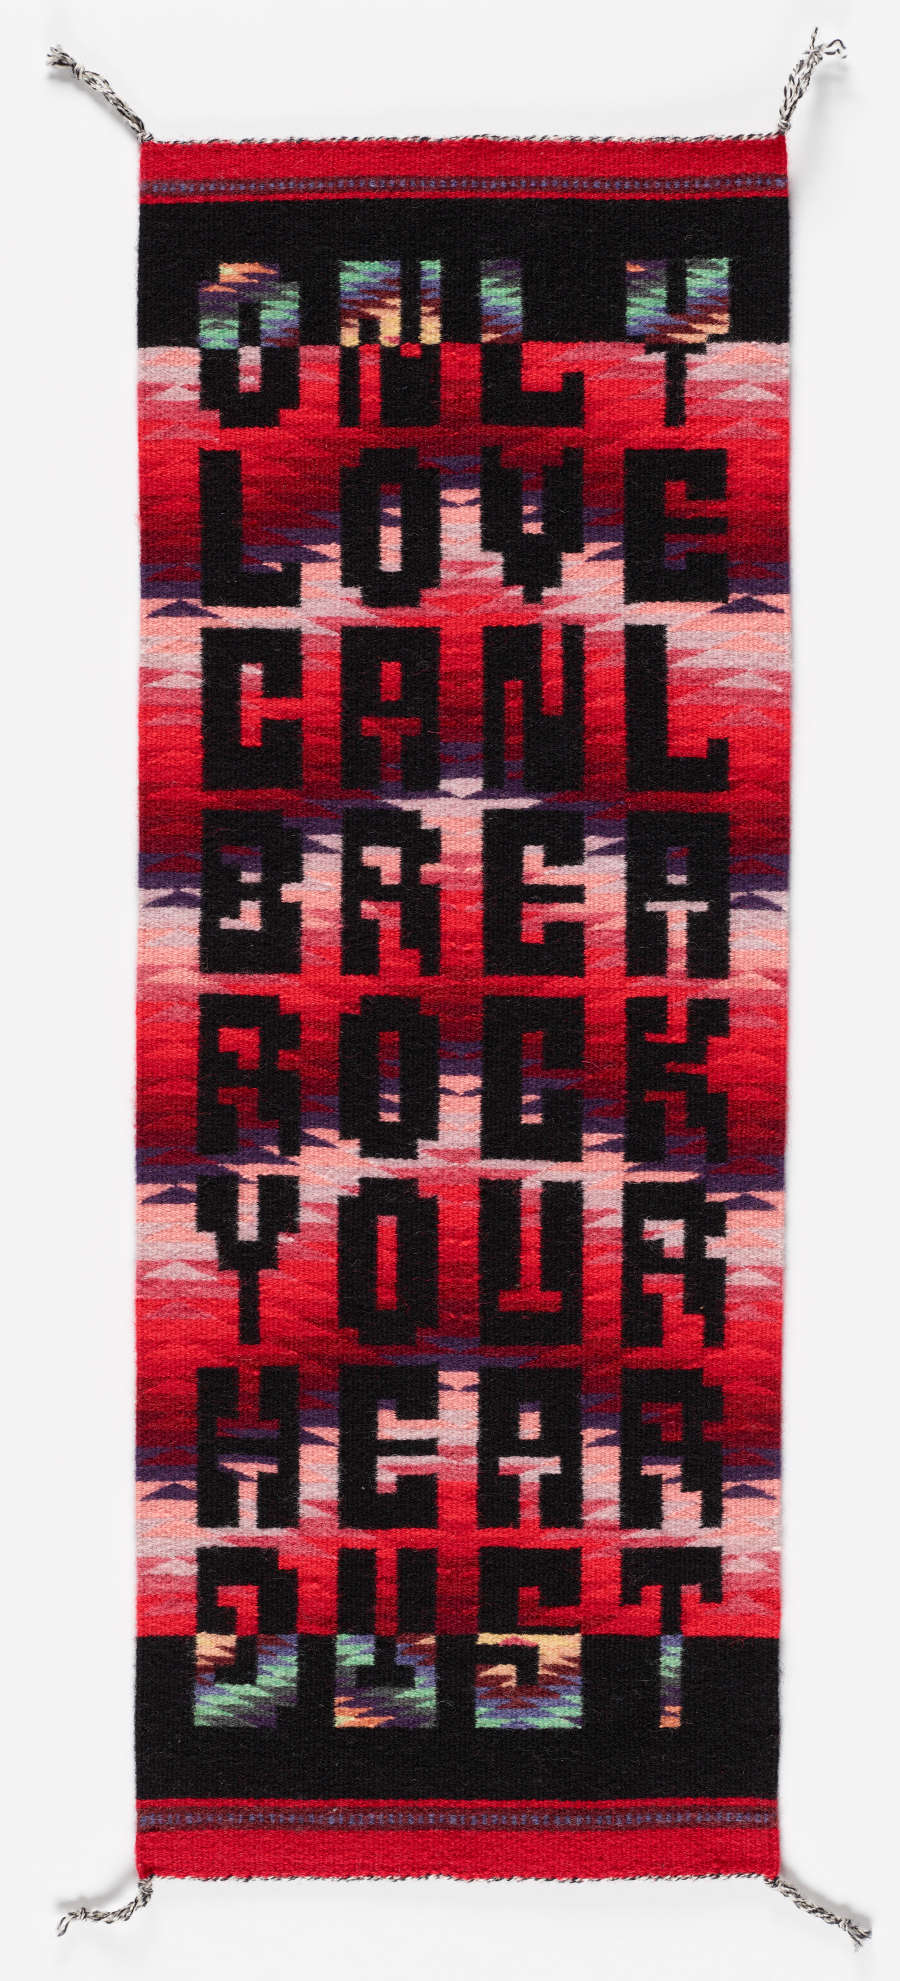 Narrow black and red woven tapestry with red and pink chevron patterning in the center and eight rows of one-worded black text which reads “only love canl brea rock your hear dust” 